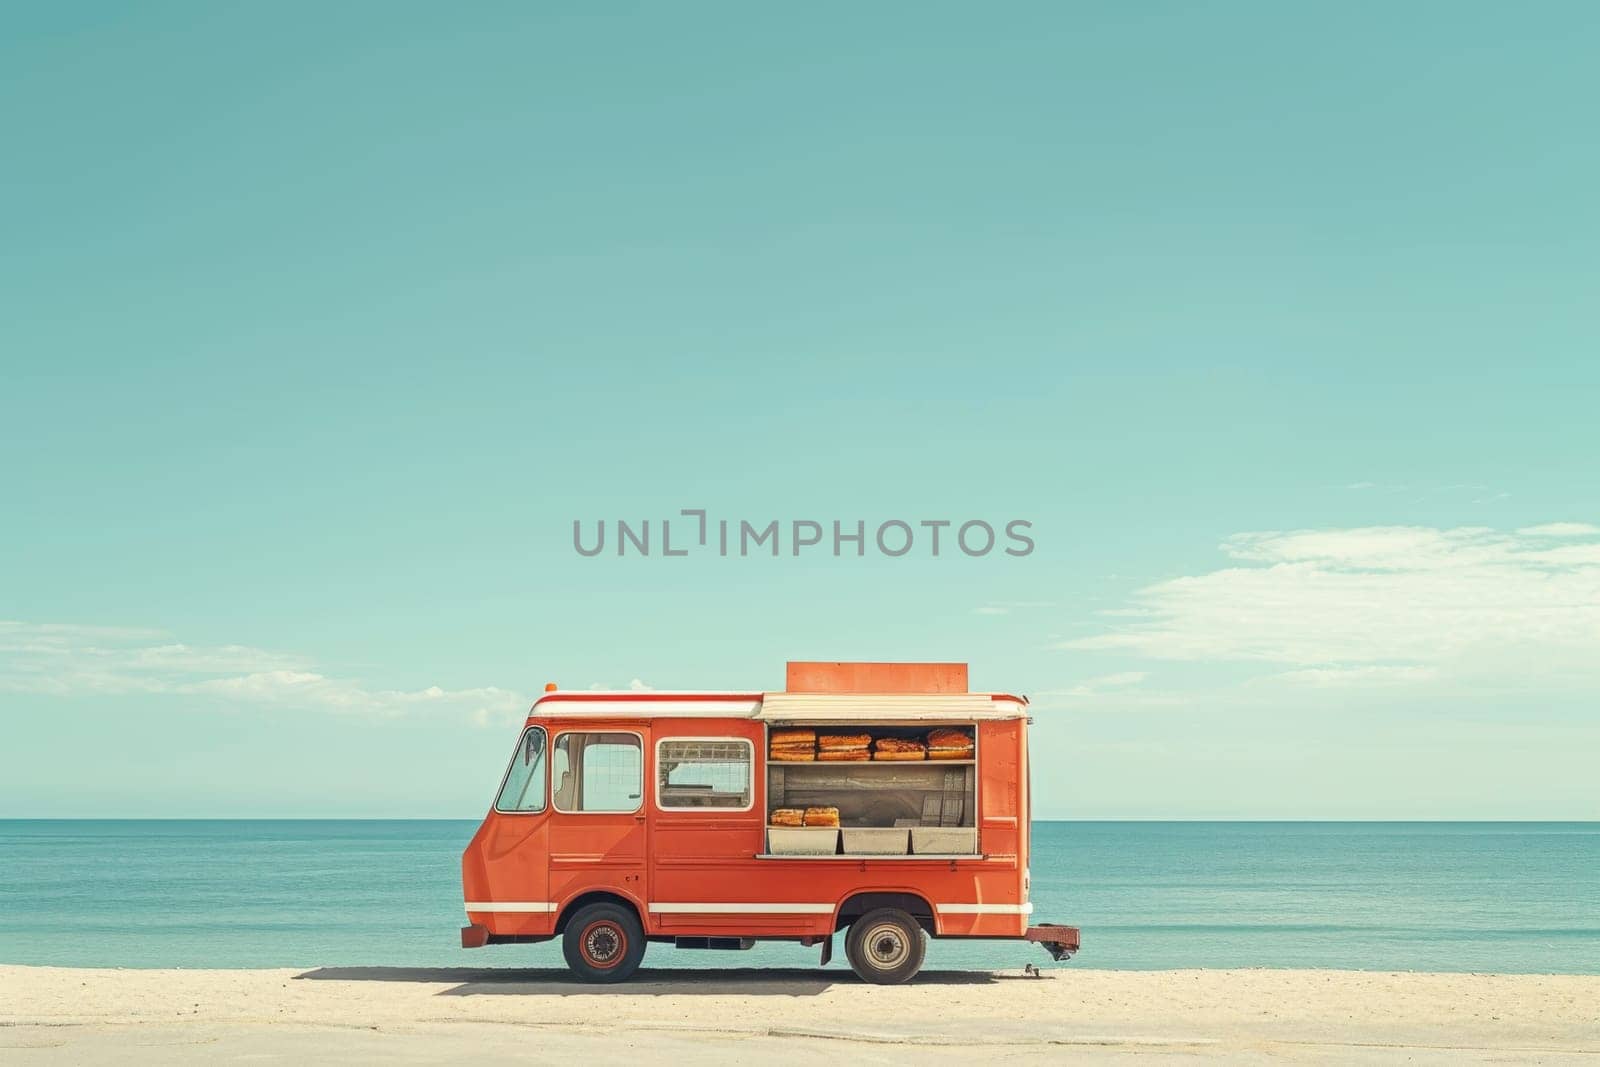 A retro orange camper van stands on the beach at the campsite. 3D illustration by Lobachad